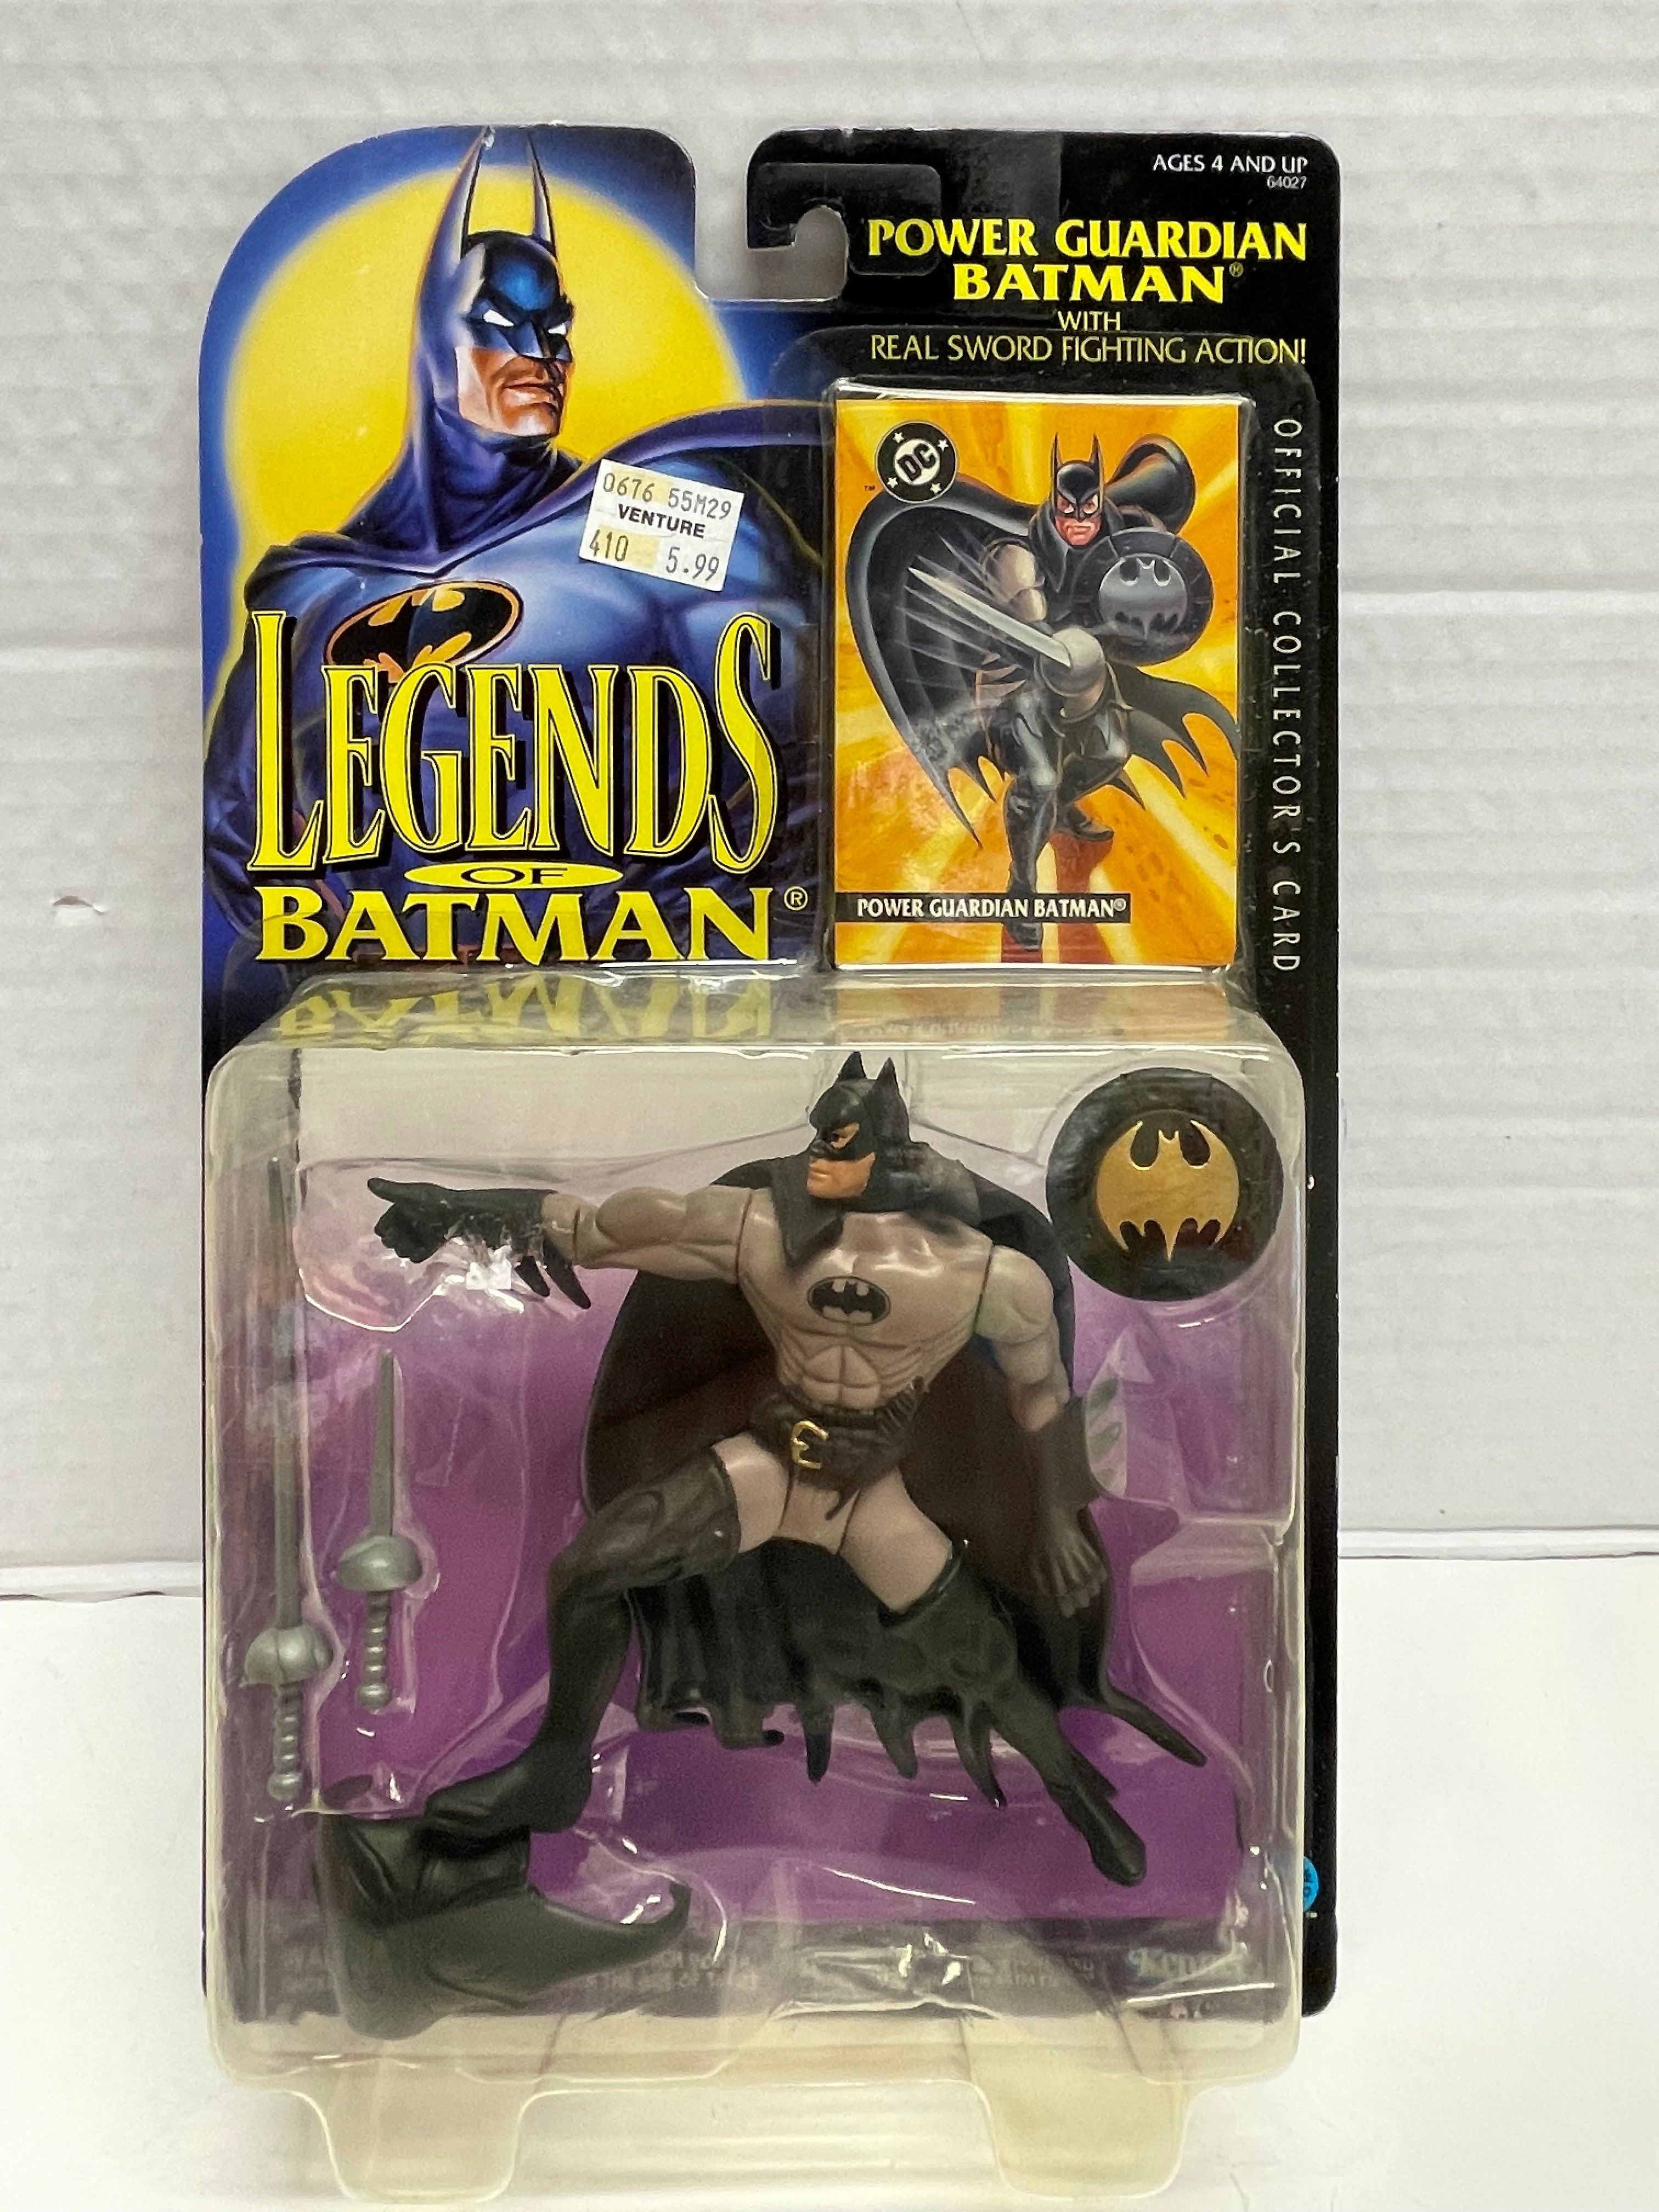 Legends of Batman Power Guardian Batman & Official Collector's Card MO –  Back In Time Comics and Toys